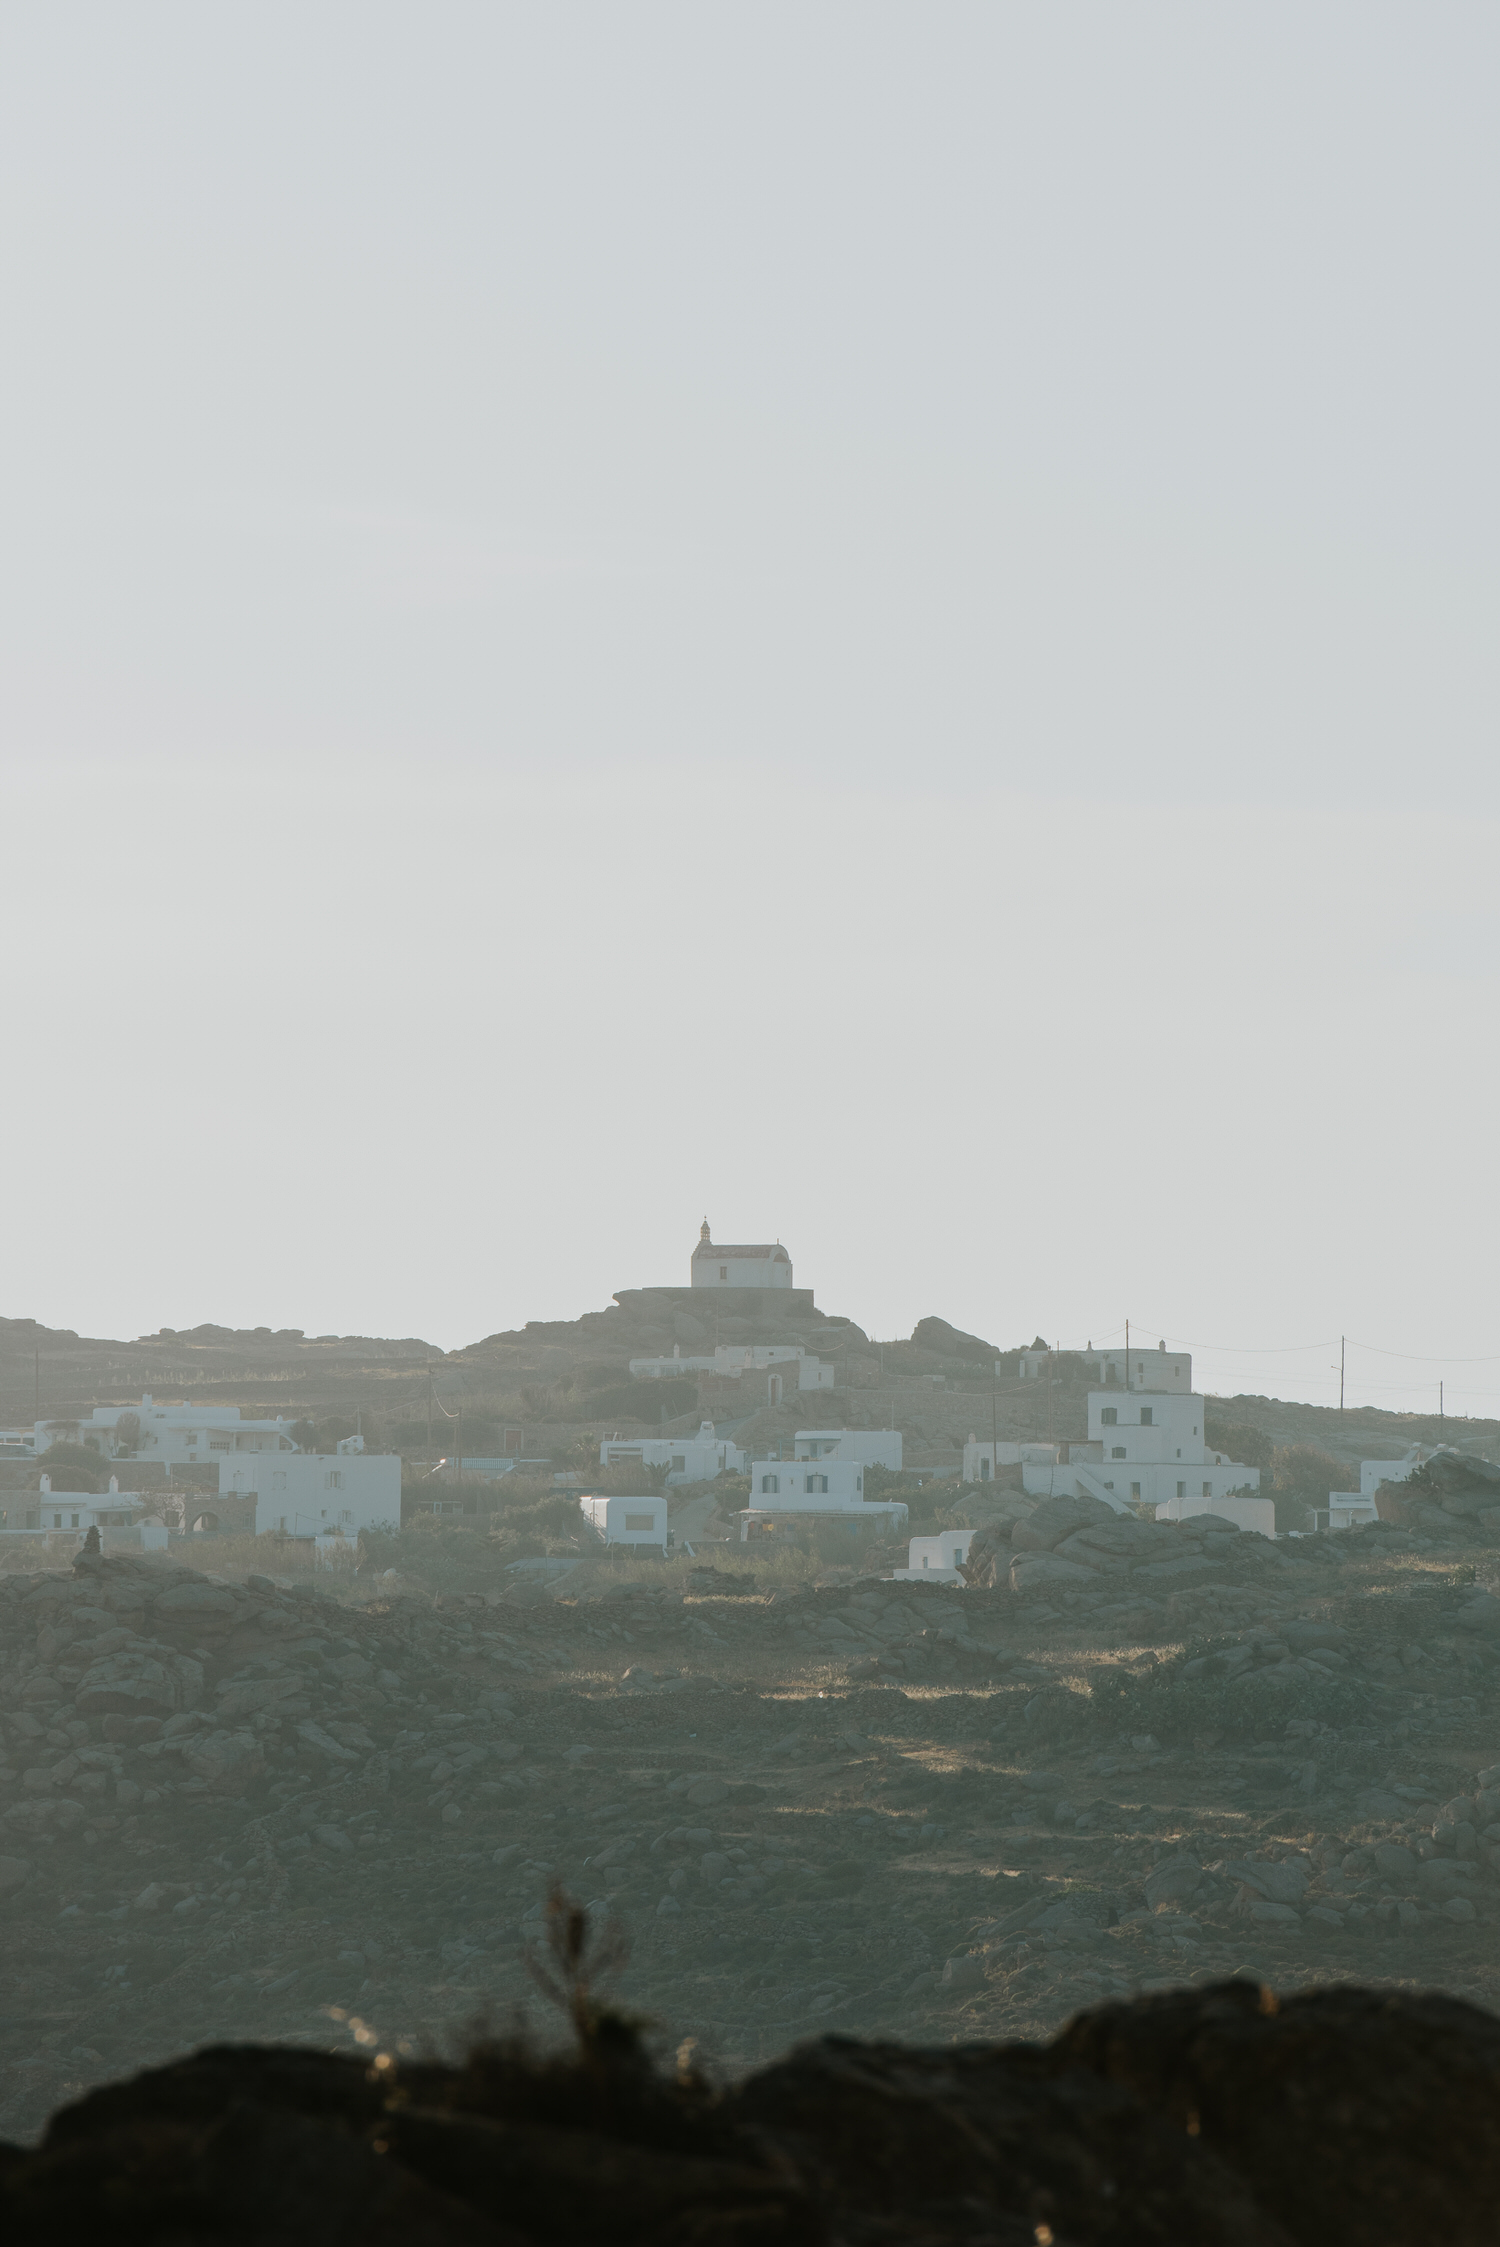 Mykonos wedding photographer: red roof church in sunset light on the hill top in Mykonian landscape.